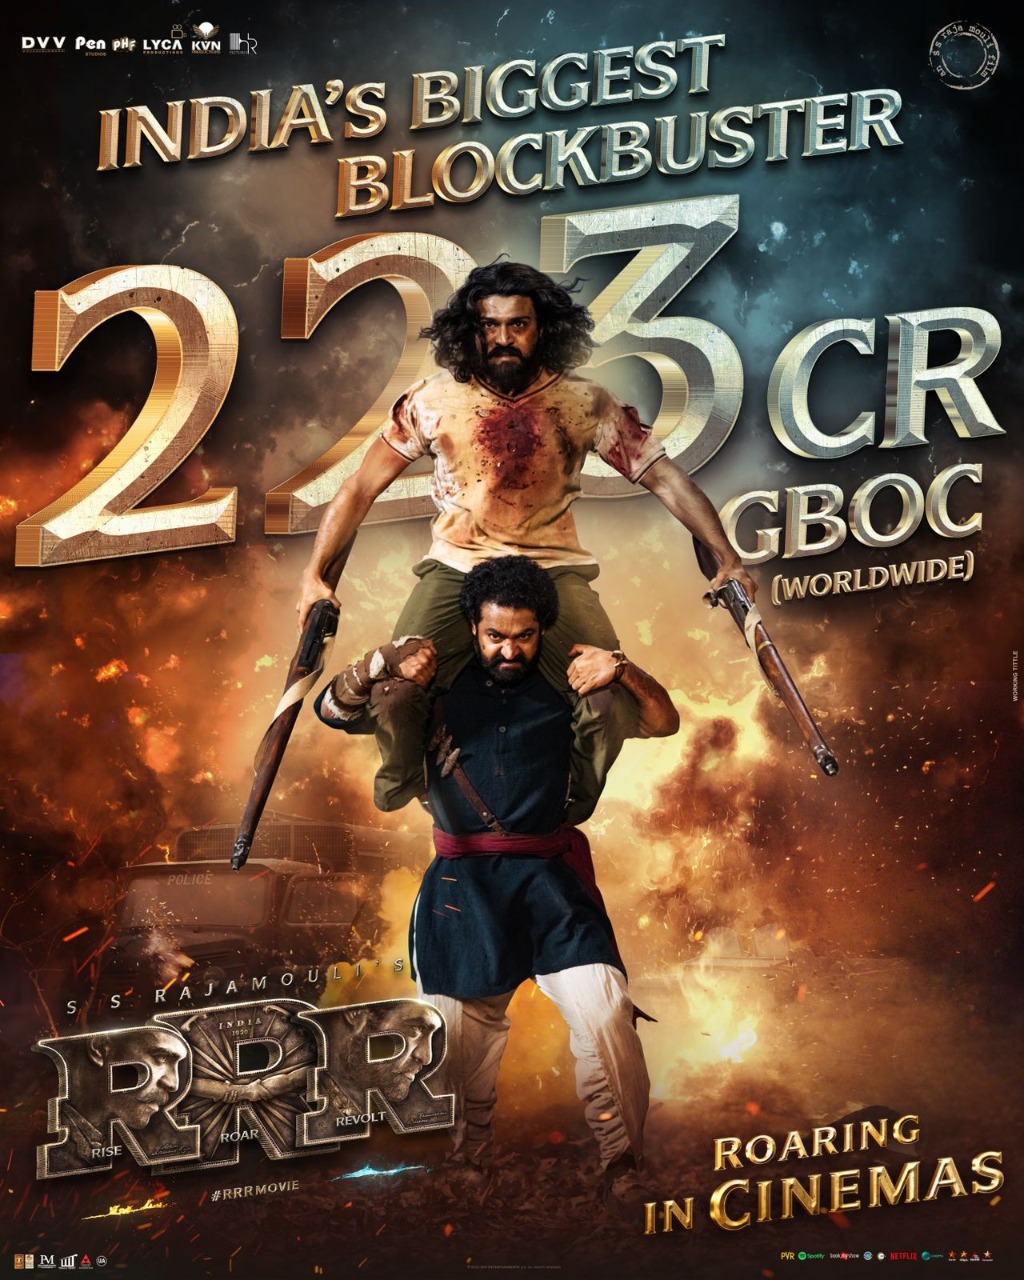 RRR Movie Worldwide box office collection 1100 Crores + Gross